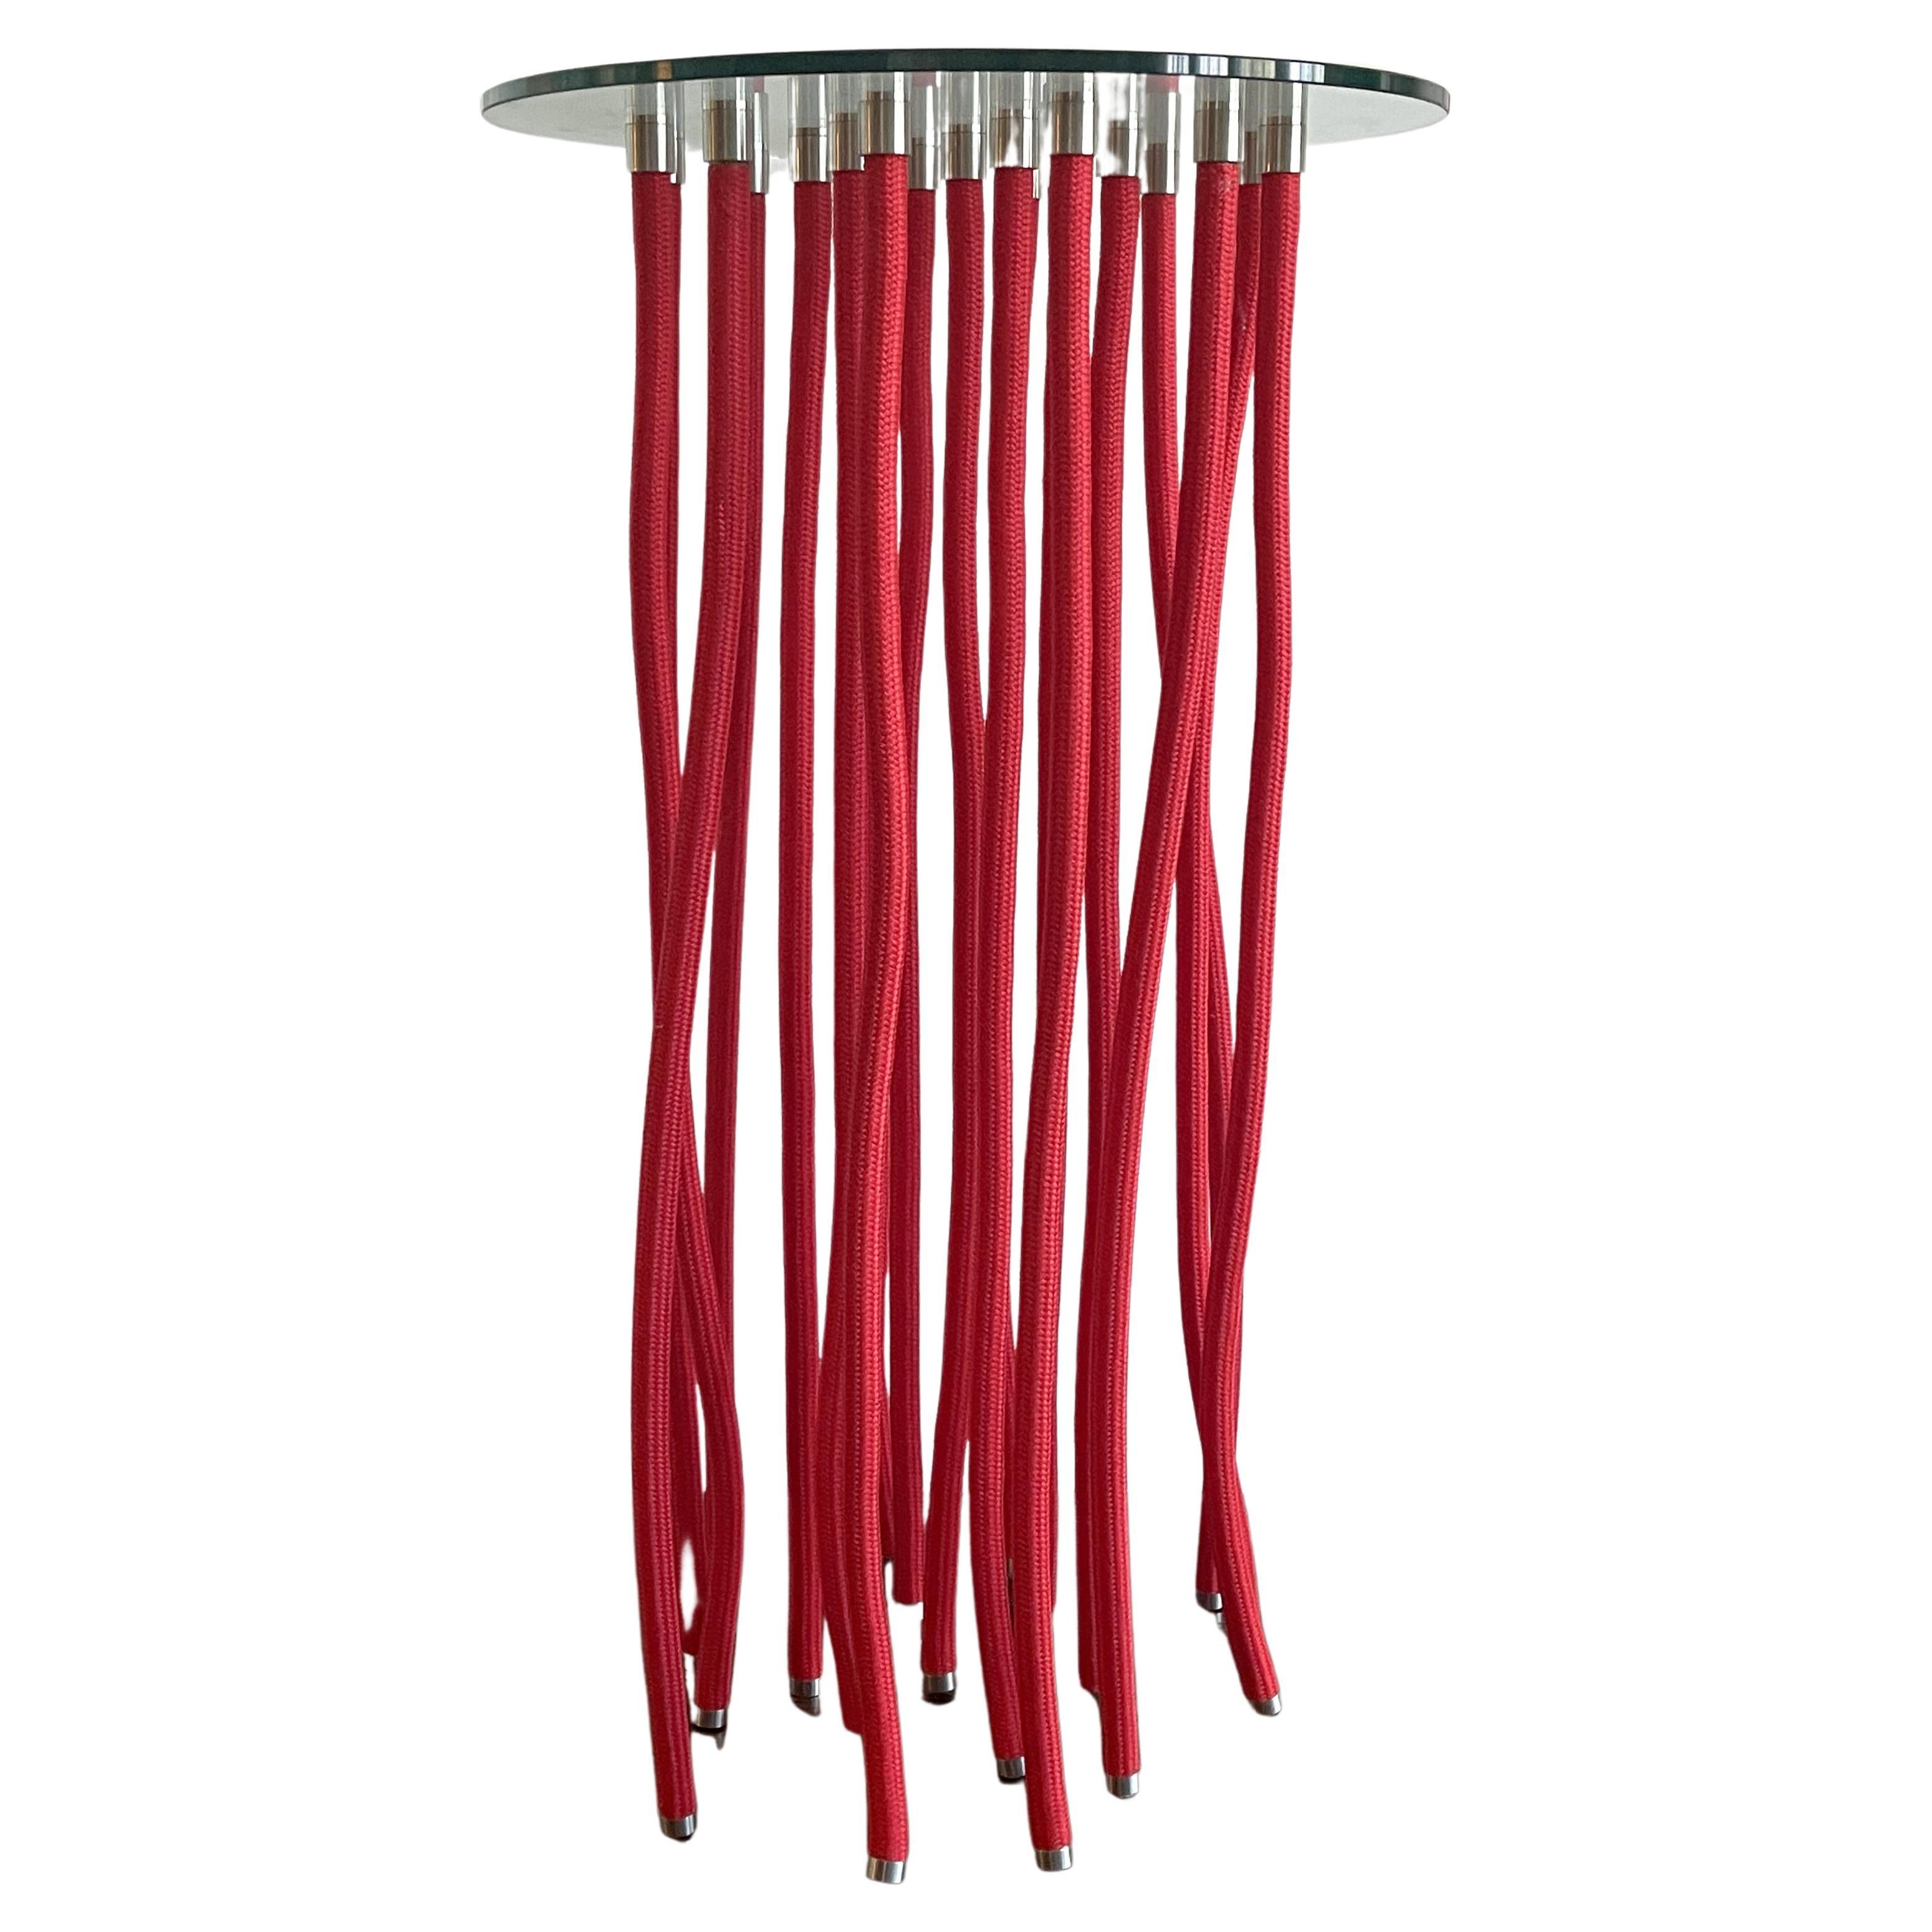 Tall ORG tables by Fabio Novembre for Cappellini For Sale at 1stDibs